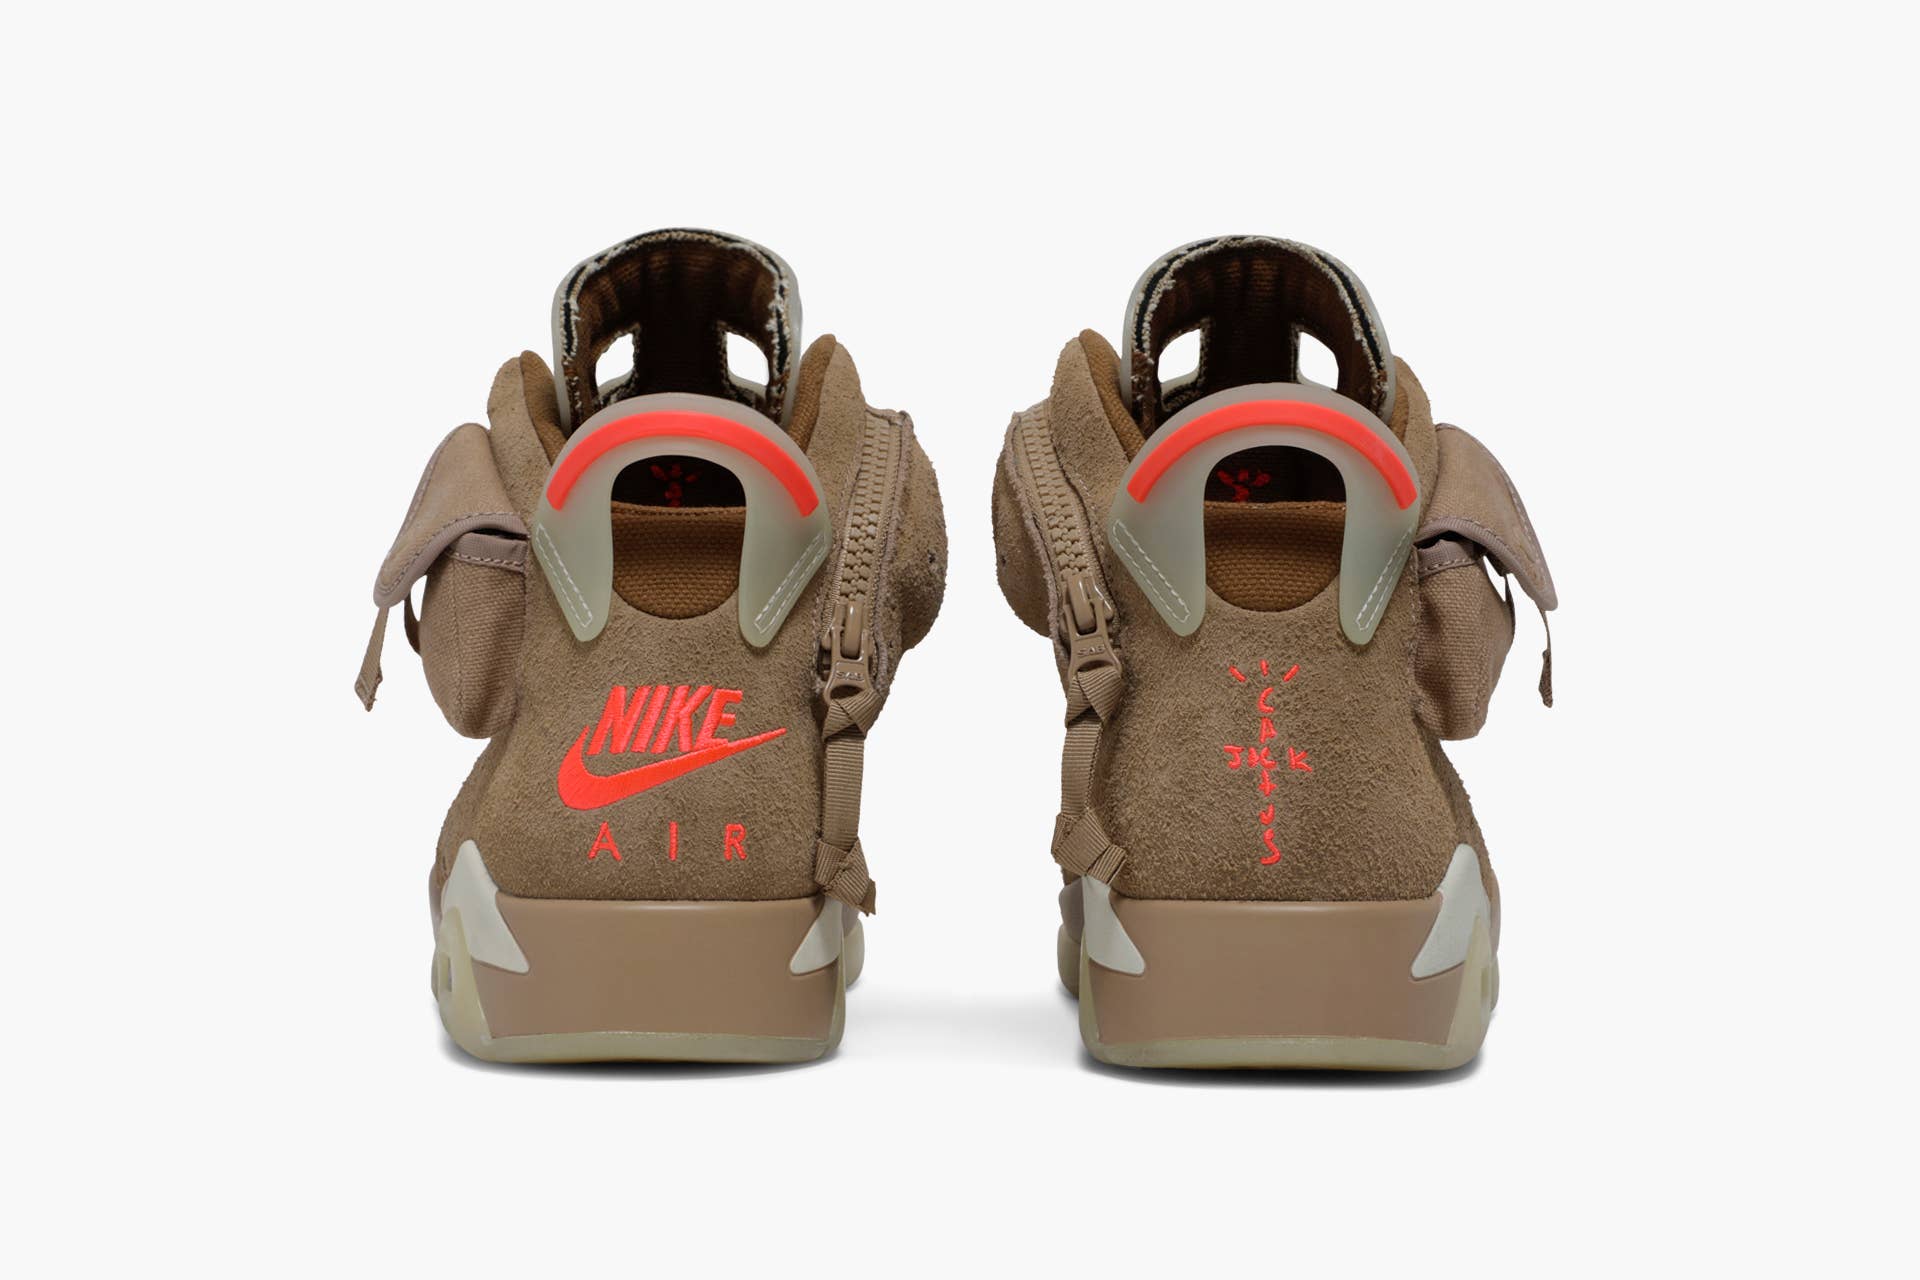 Travis Scott's new Air Jordan 6 collab is already sold out